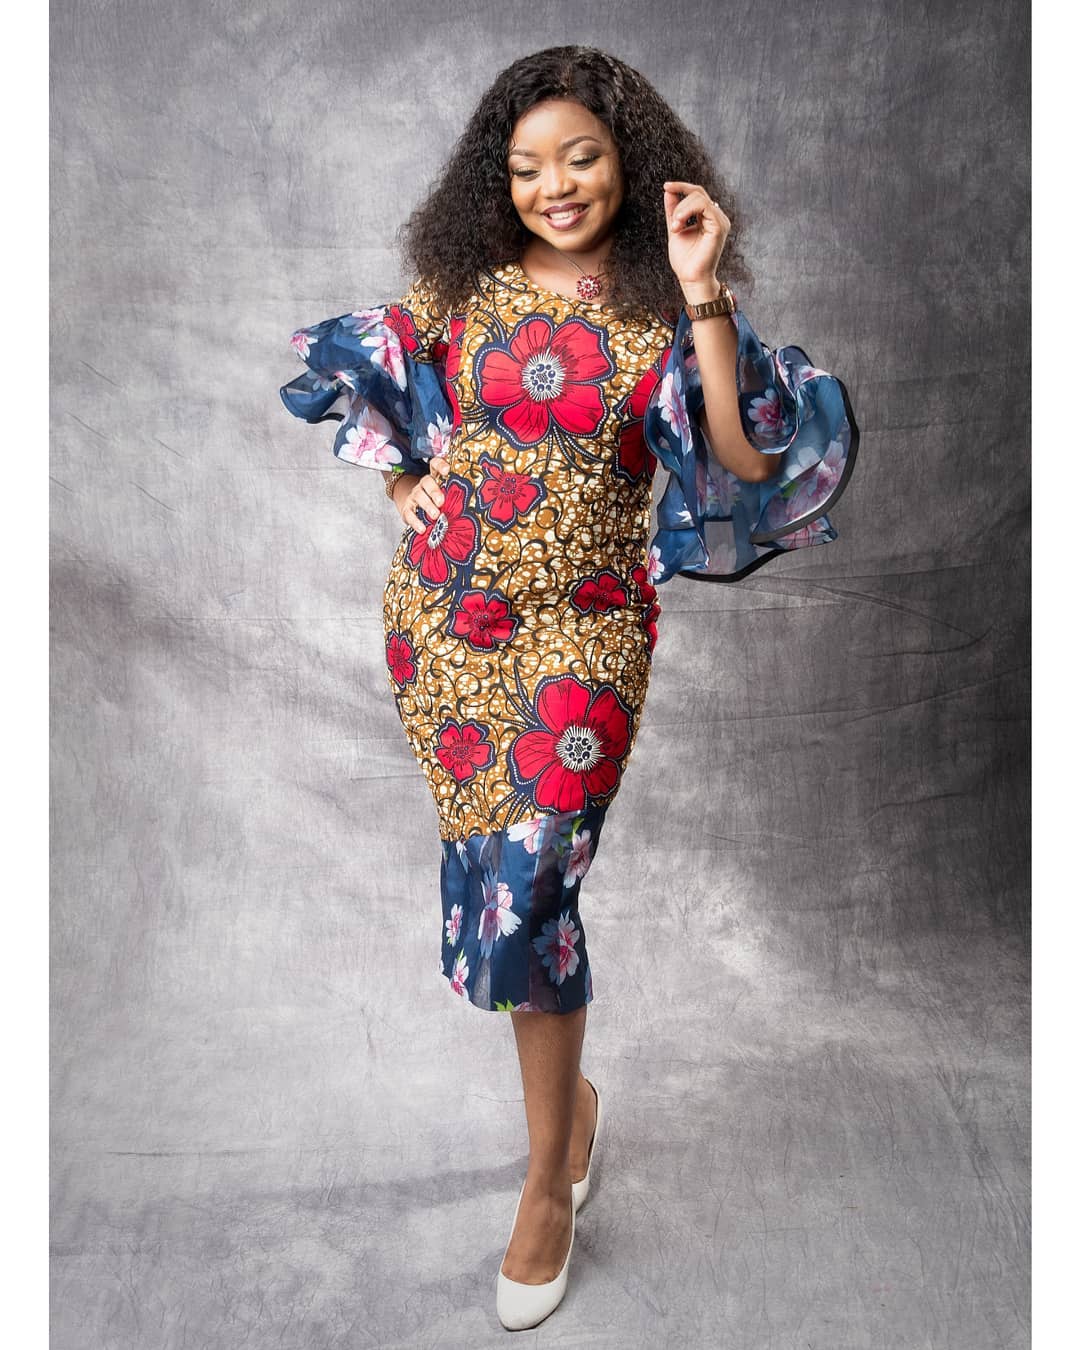 Fashionable, Classy, and Outstanding short Ankara gown 2023